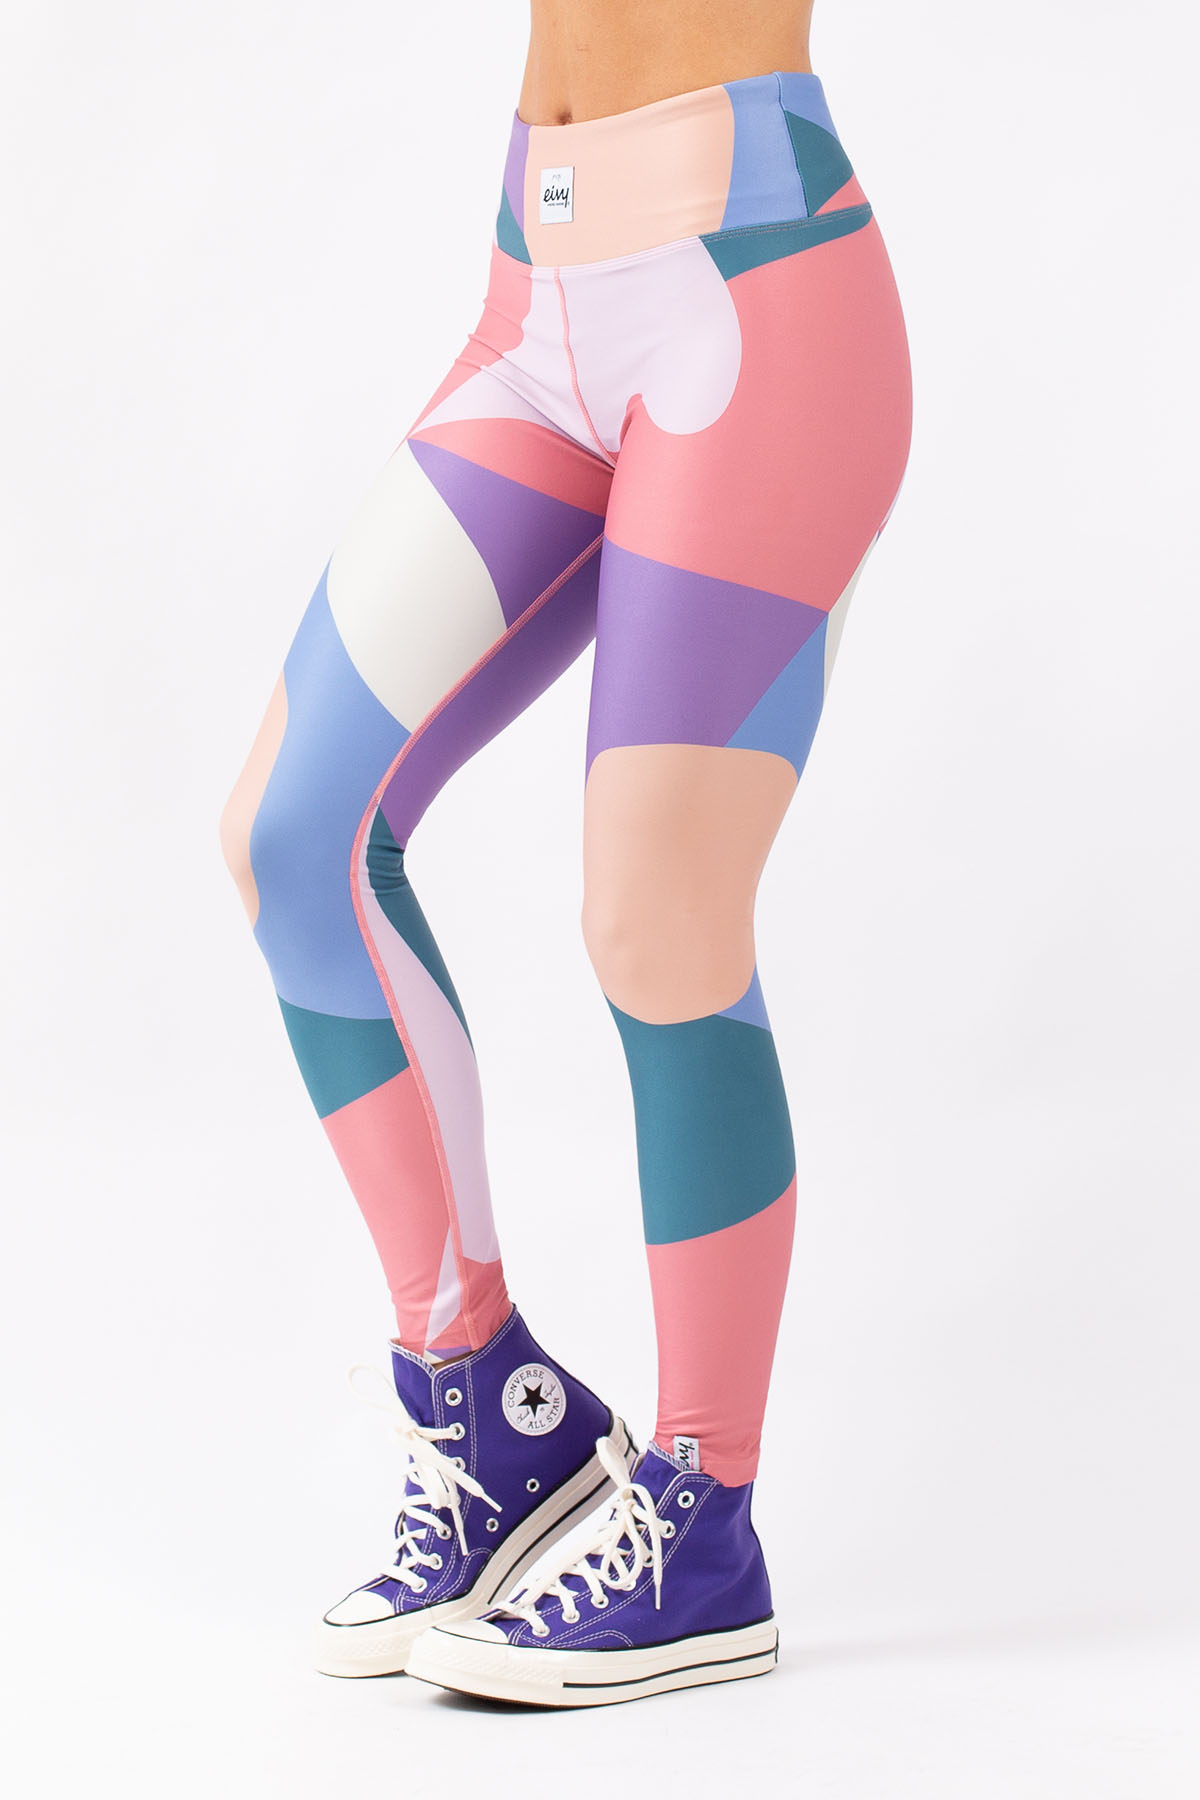 Icecold Tights - Abstract Shapes | XXS